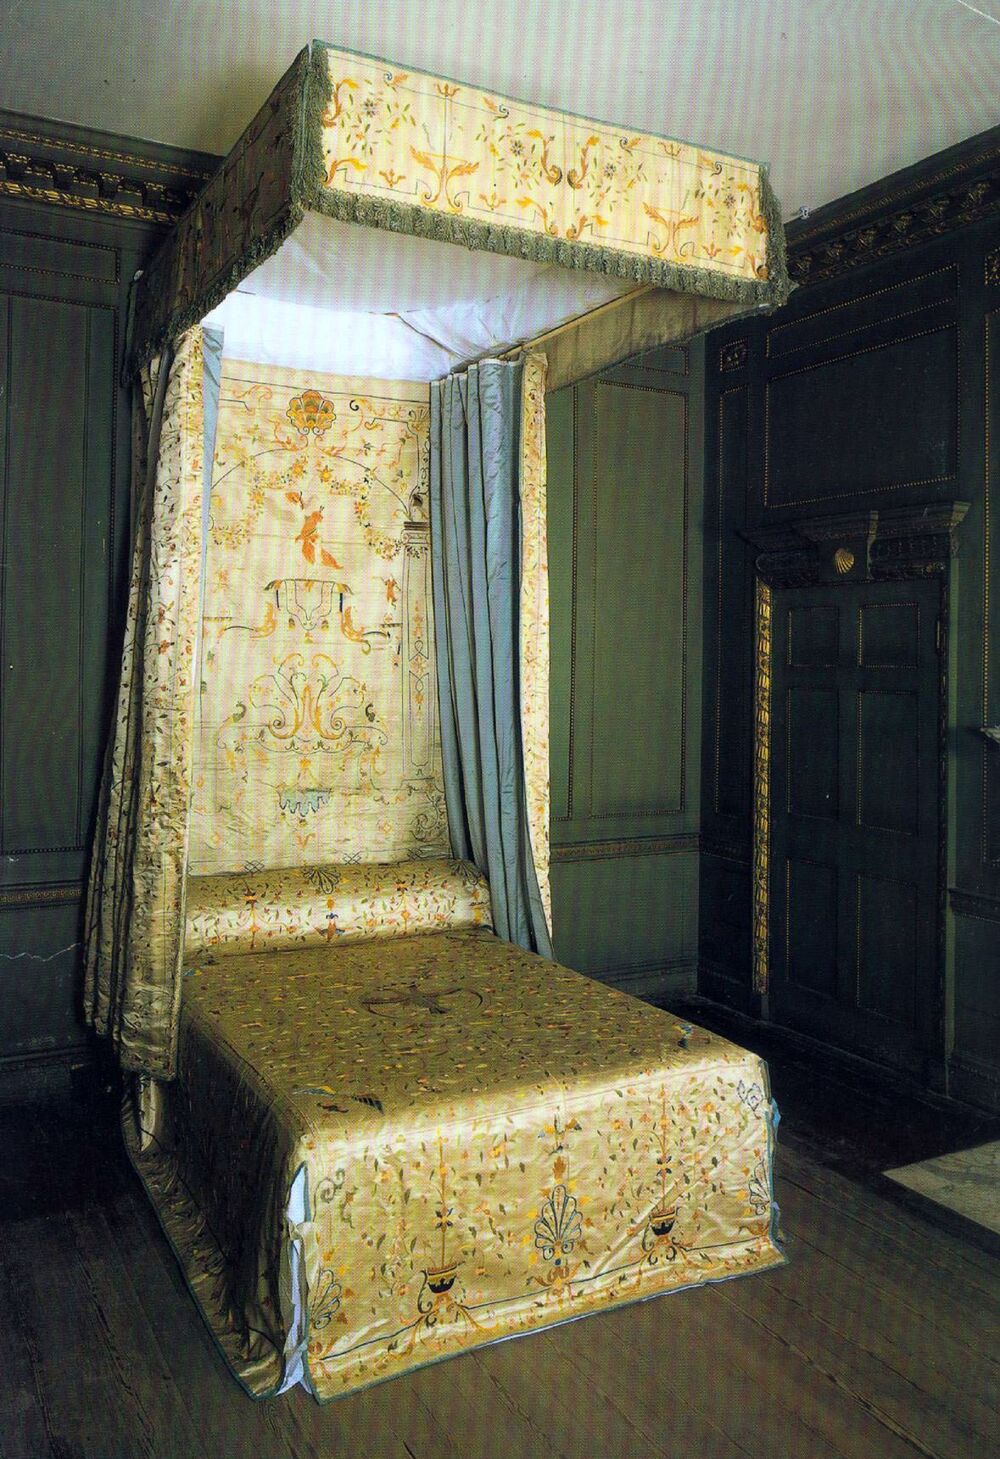 A formal 18th-century-style bed is displayed in a grand bedroom. The bed is covered by exquisite silk panels, featuring various embroidered motifs. The silk hangings are mostly golden in colour and contrast against the darker green wooden panels on the walls.